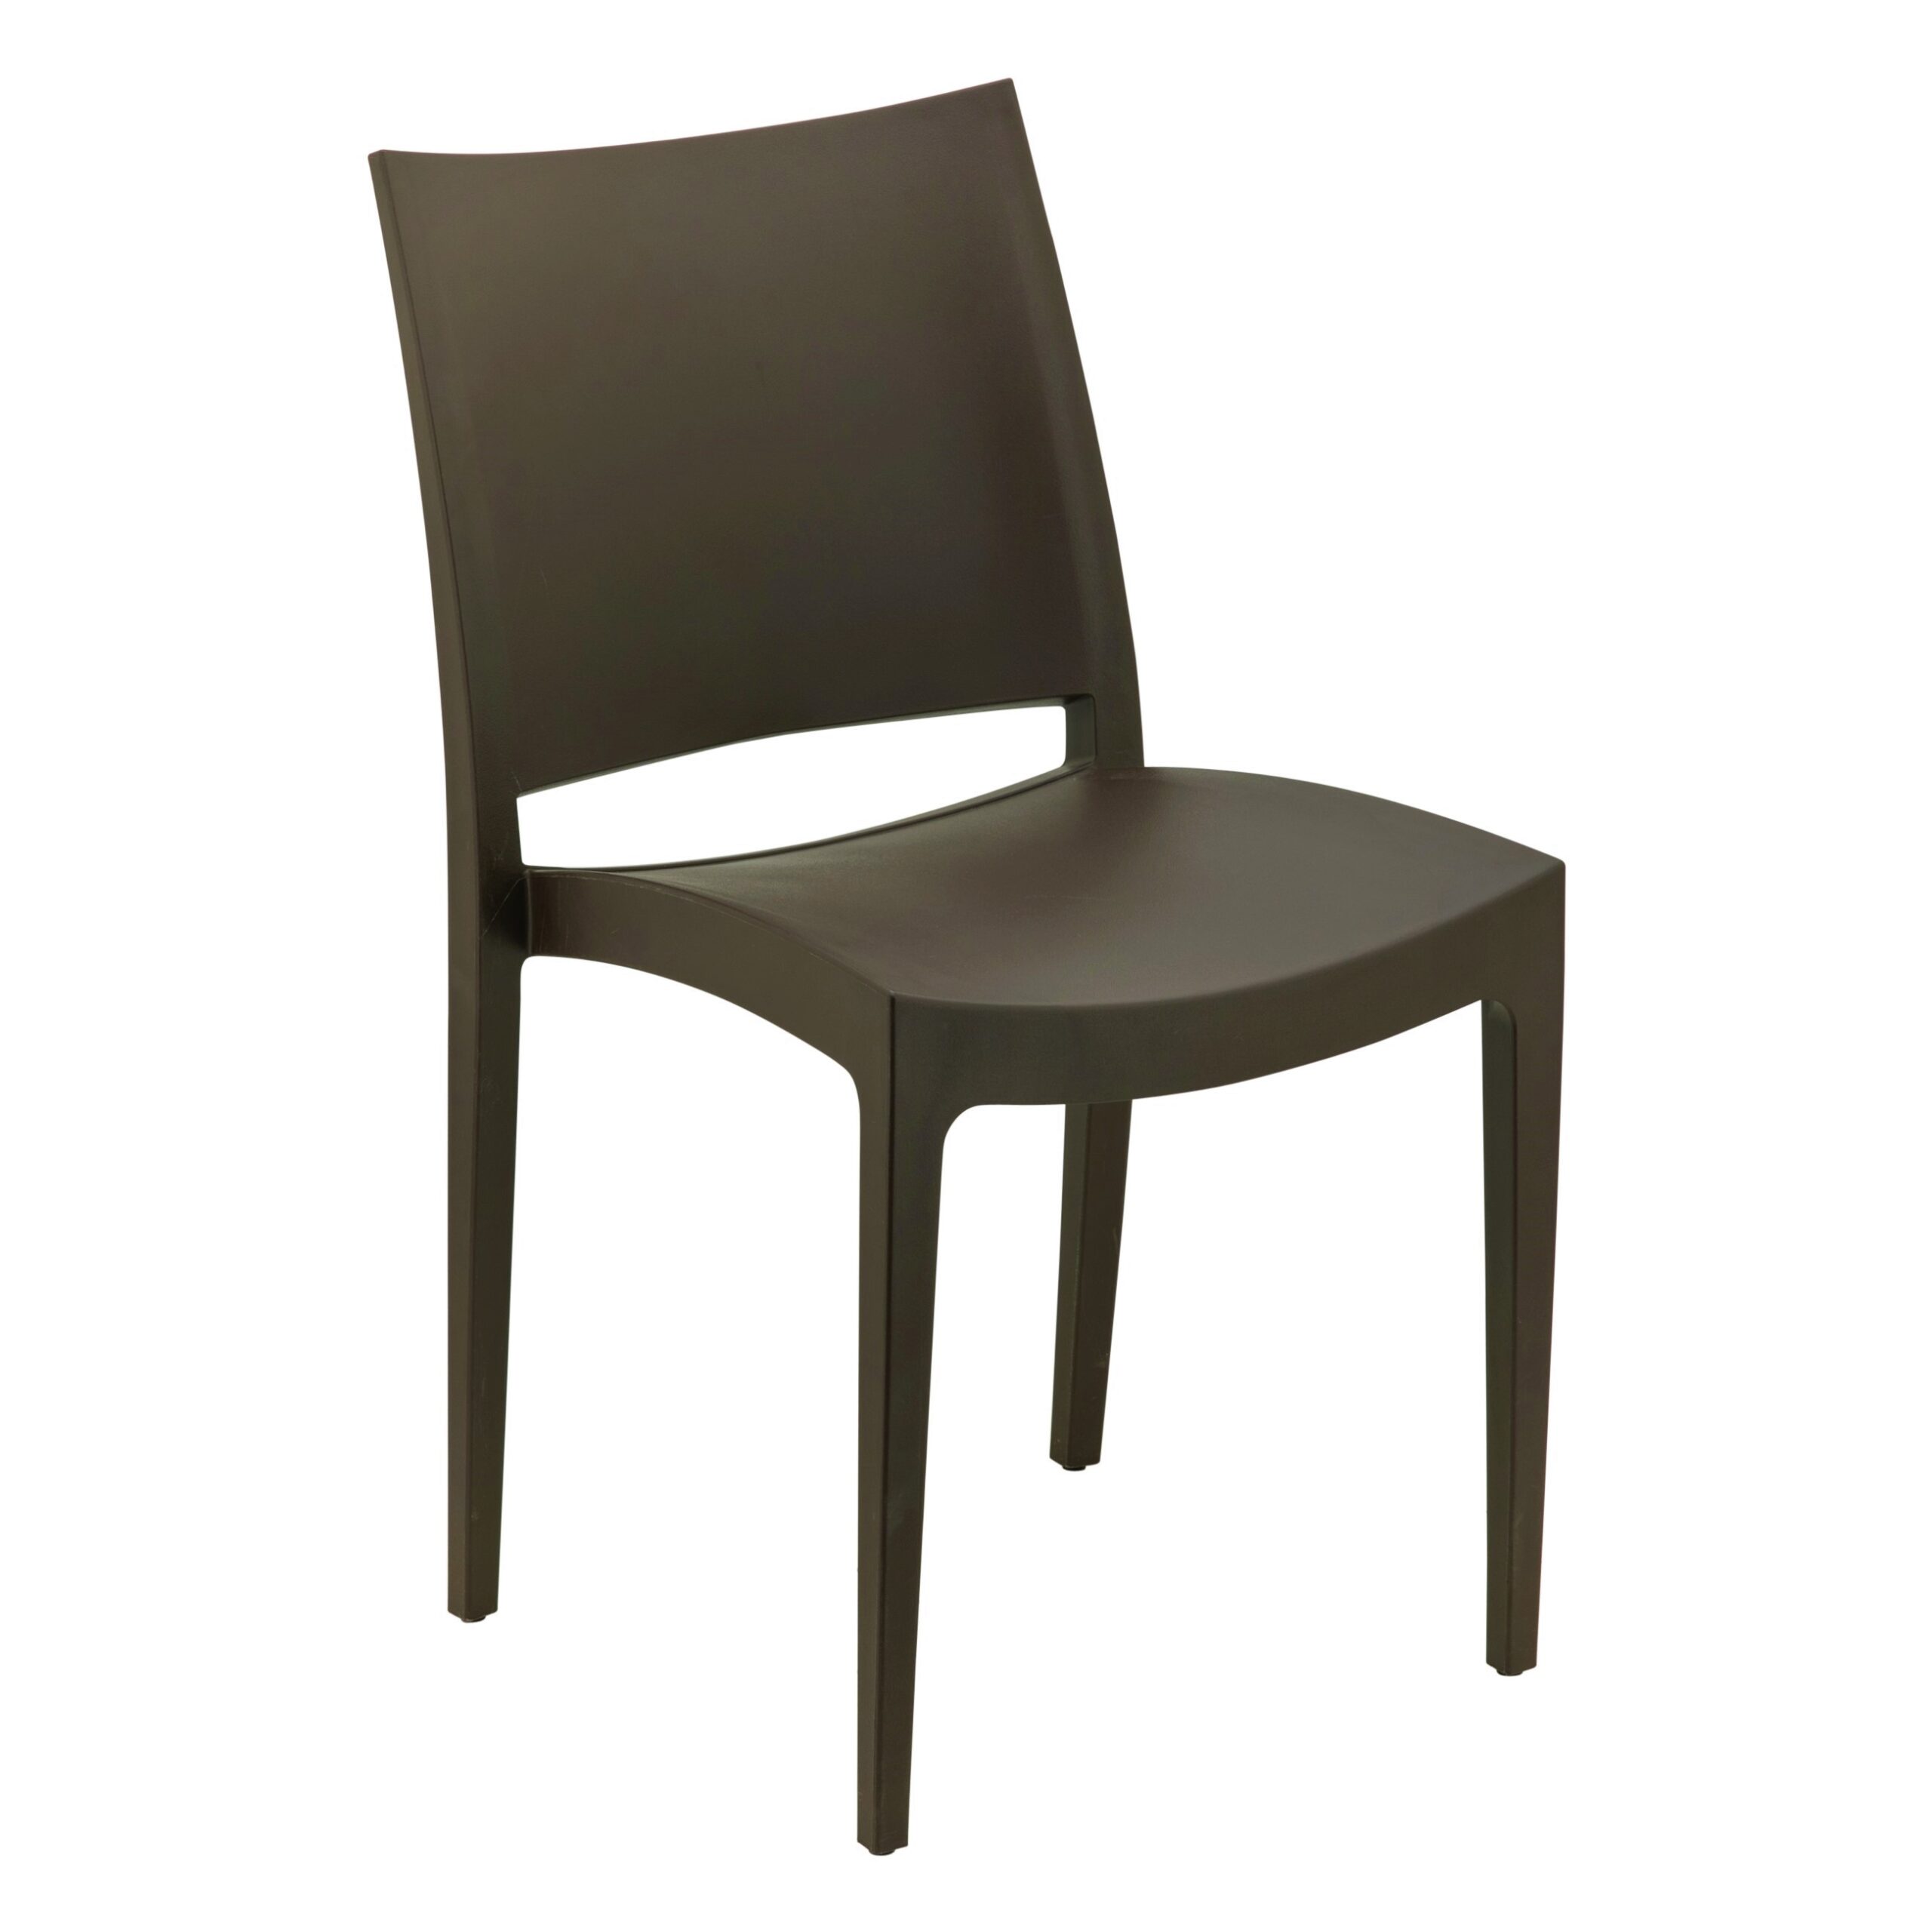 Specta Chair in Brown